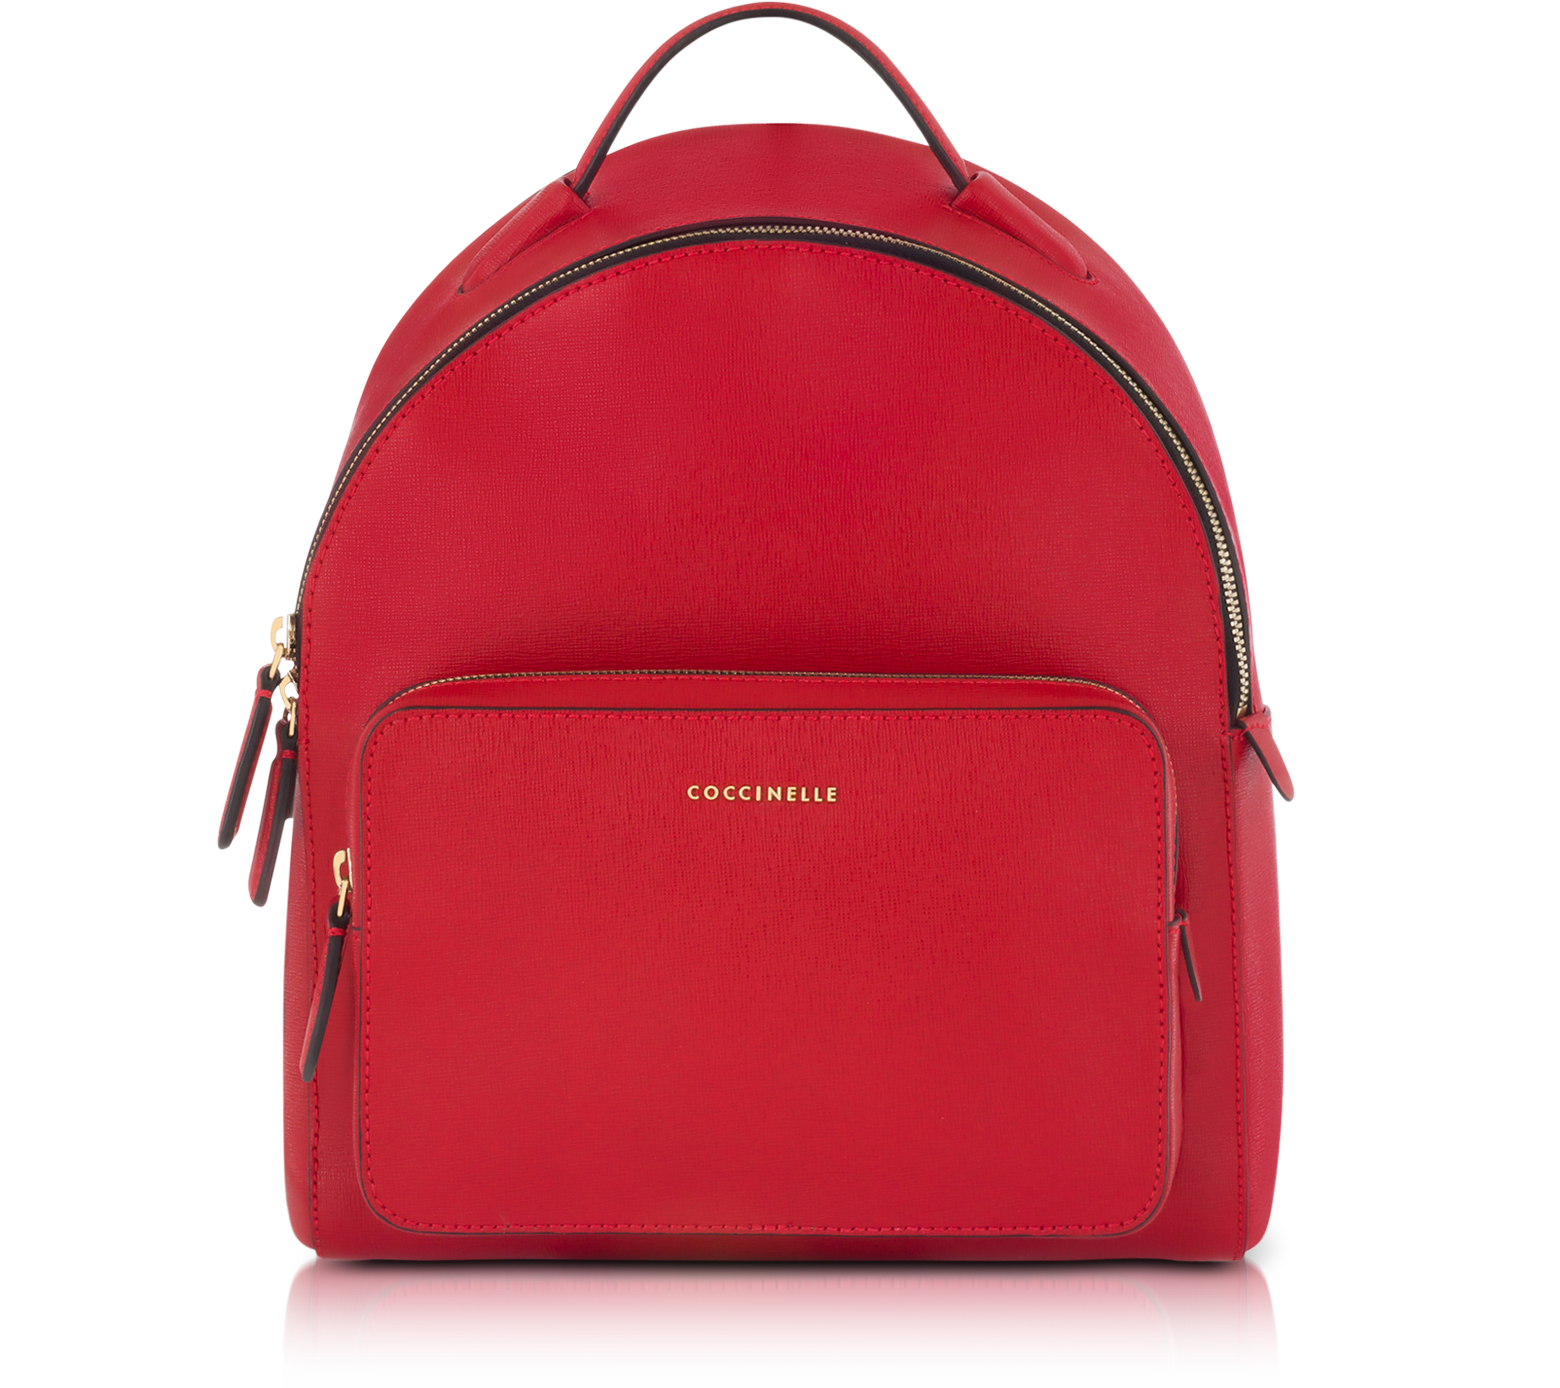 Coccinelle Clementine Poppy Red Leather Backpack at FORZIERI